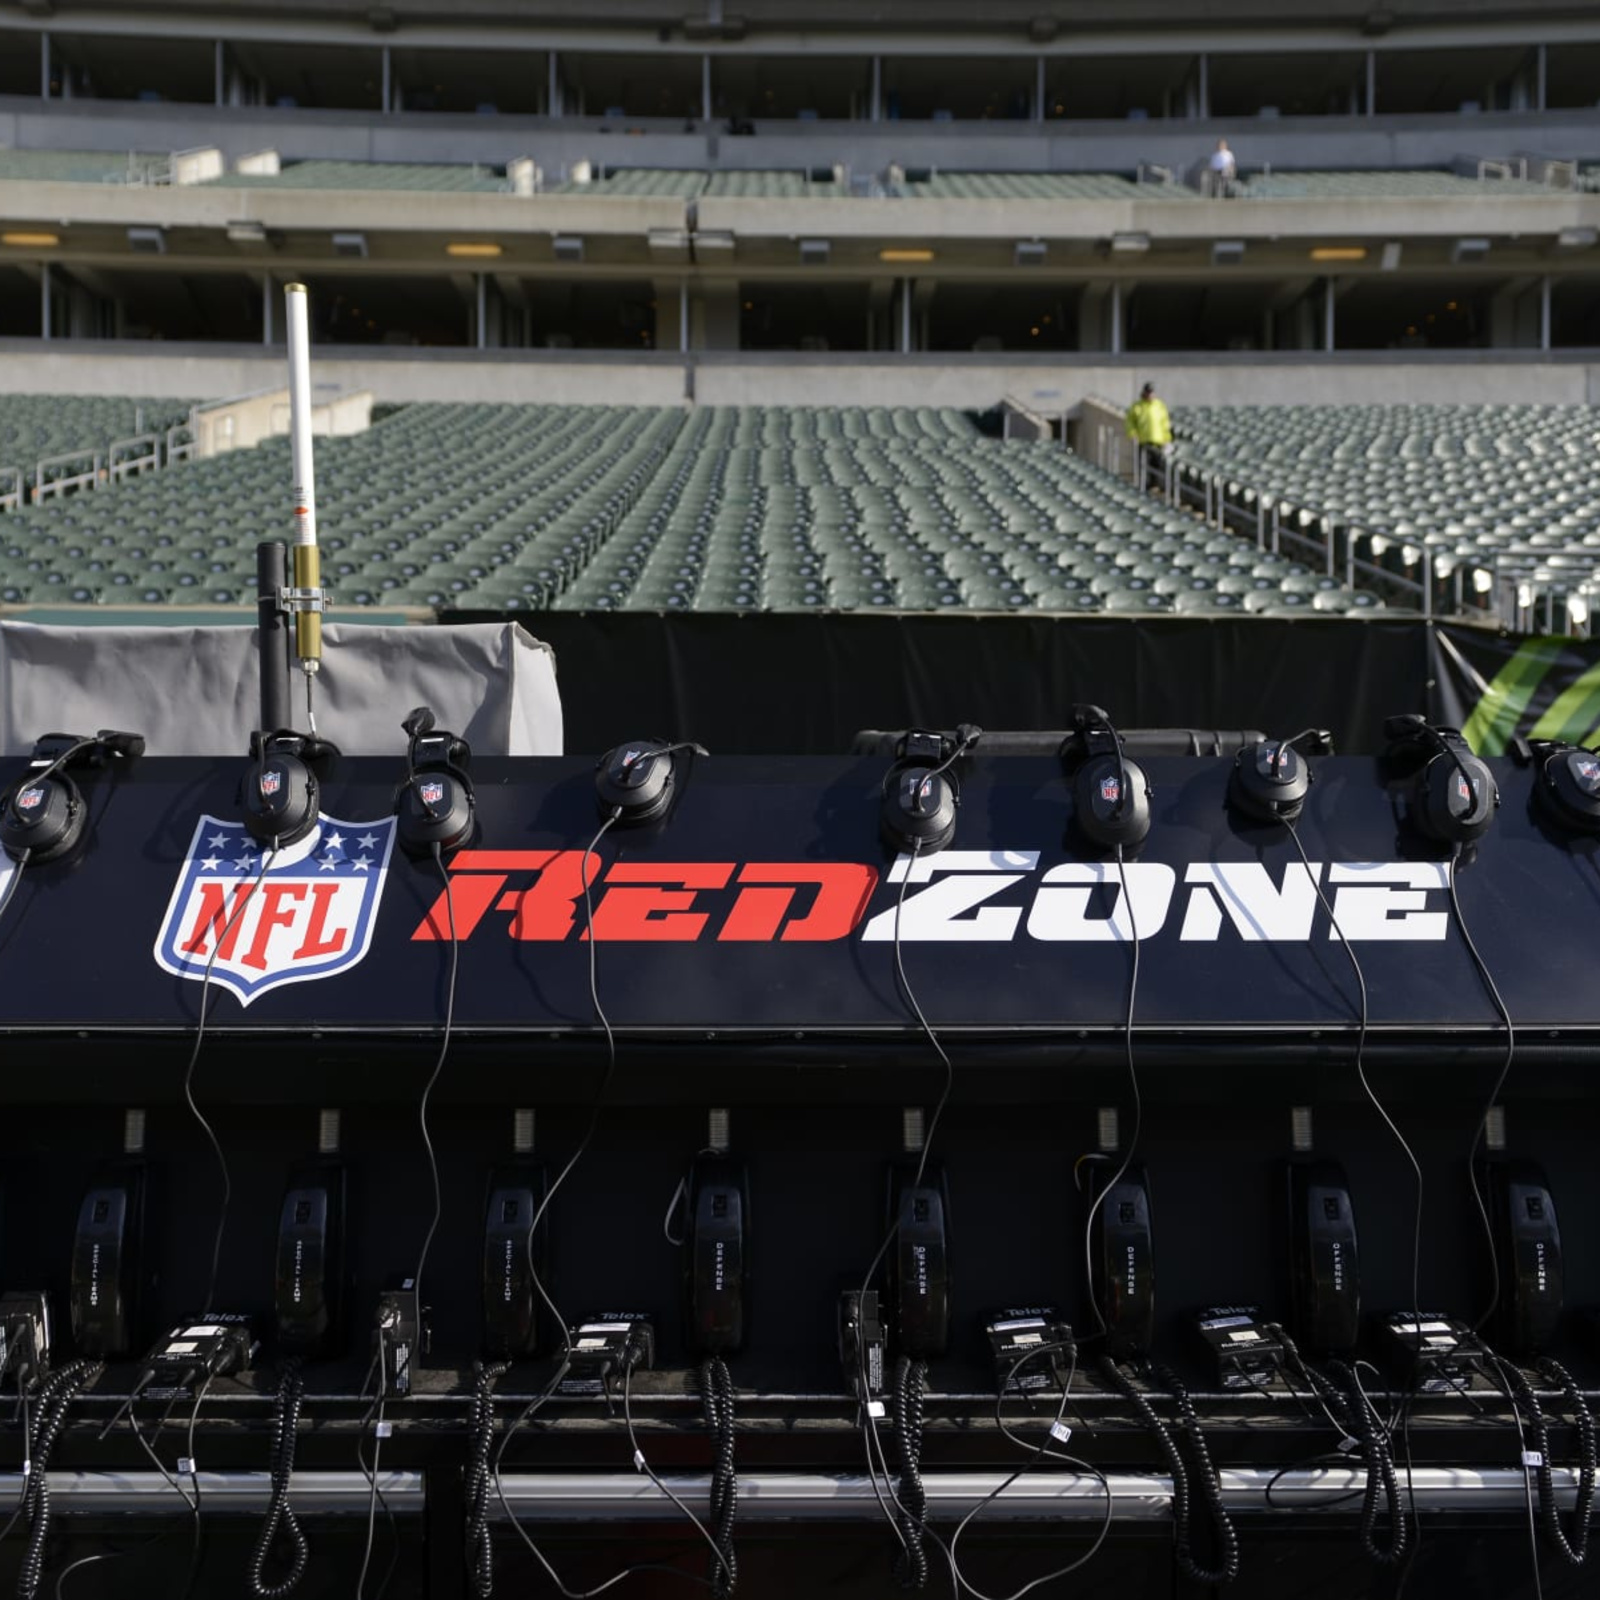 DIRECTV announces renewal, expansion of carriage agreement with NFL Media